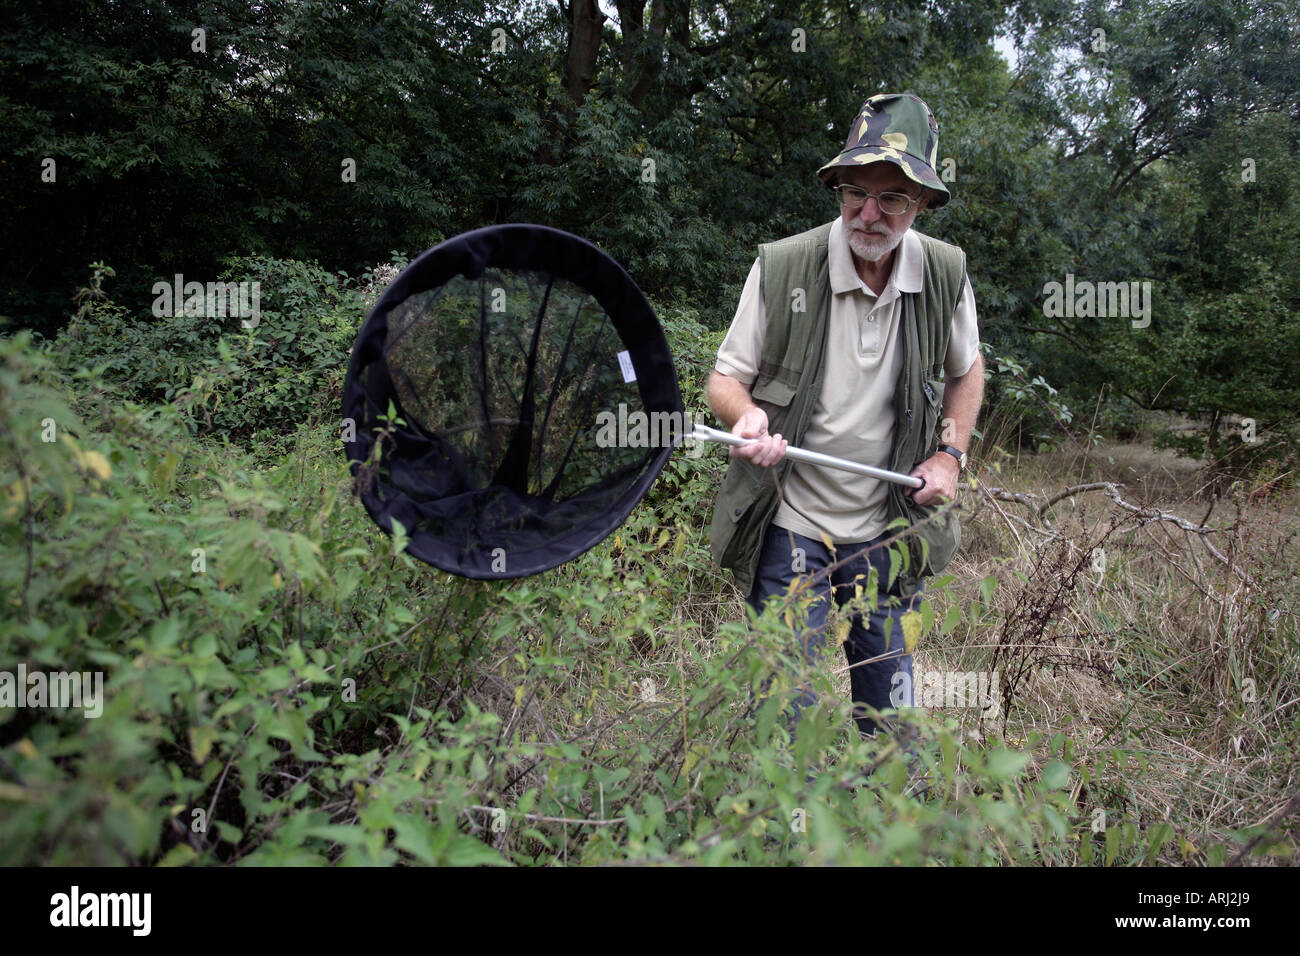 Man with Butterfly net Midlands UK Stock Photo